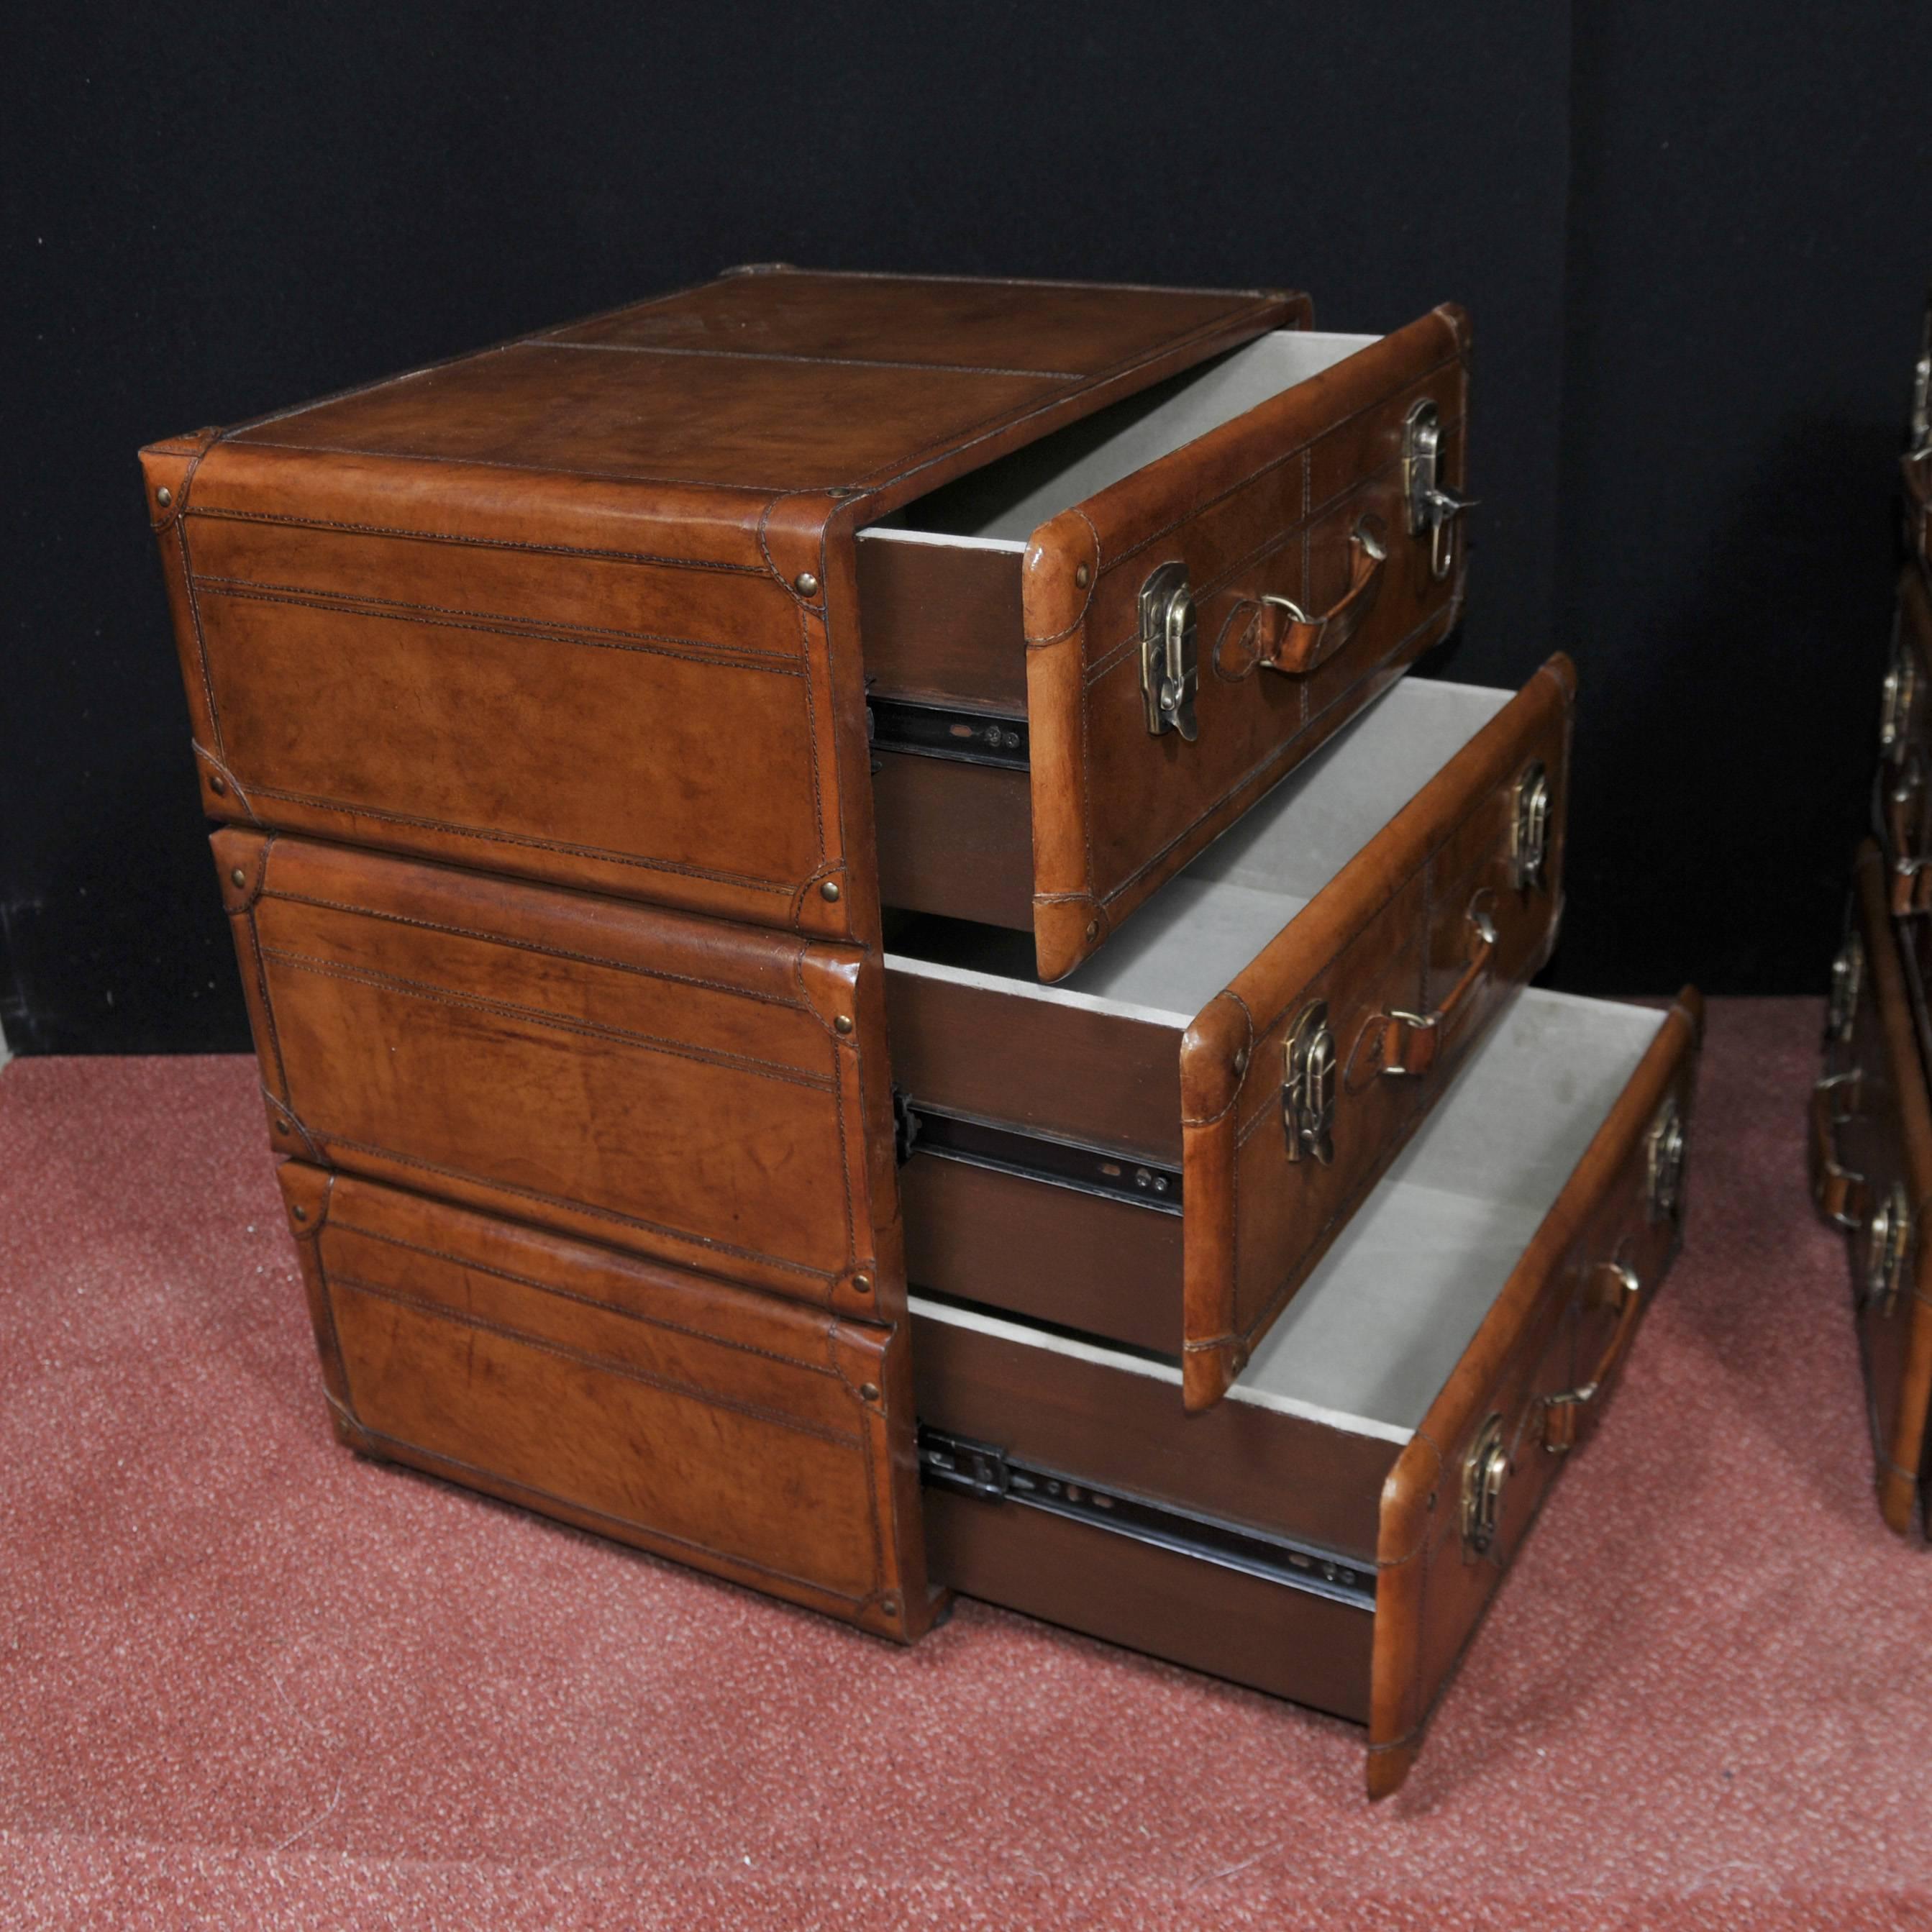 Fantastic pair of English leather Campaign furniture bedside chests - or nightstands.
Such a great look for these, really will work in any interior and bring the whole room up a notch.
Love the design which looks like three suite cases stacked on